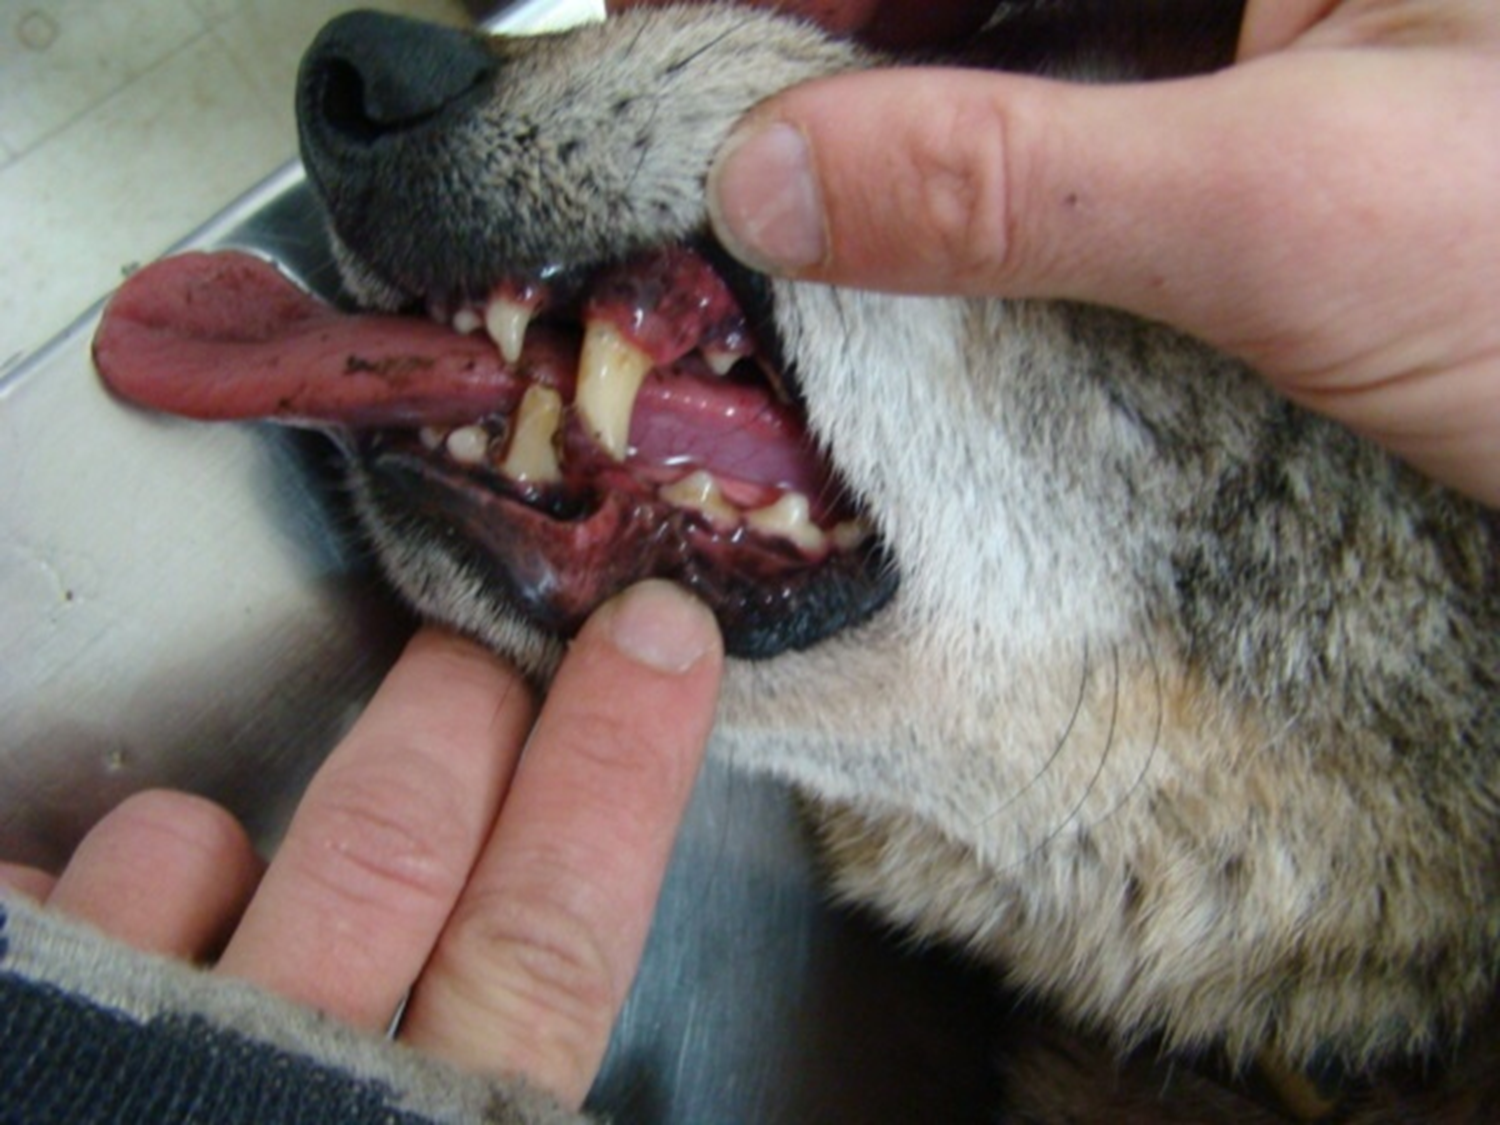 Closeup of the muzzle of an old coyote with worn-down teeth, its lips pulled back by a person's fingers.